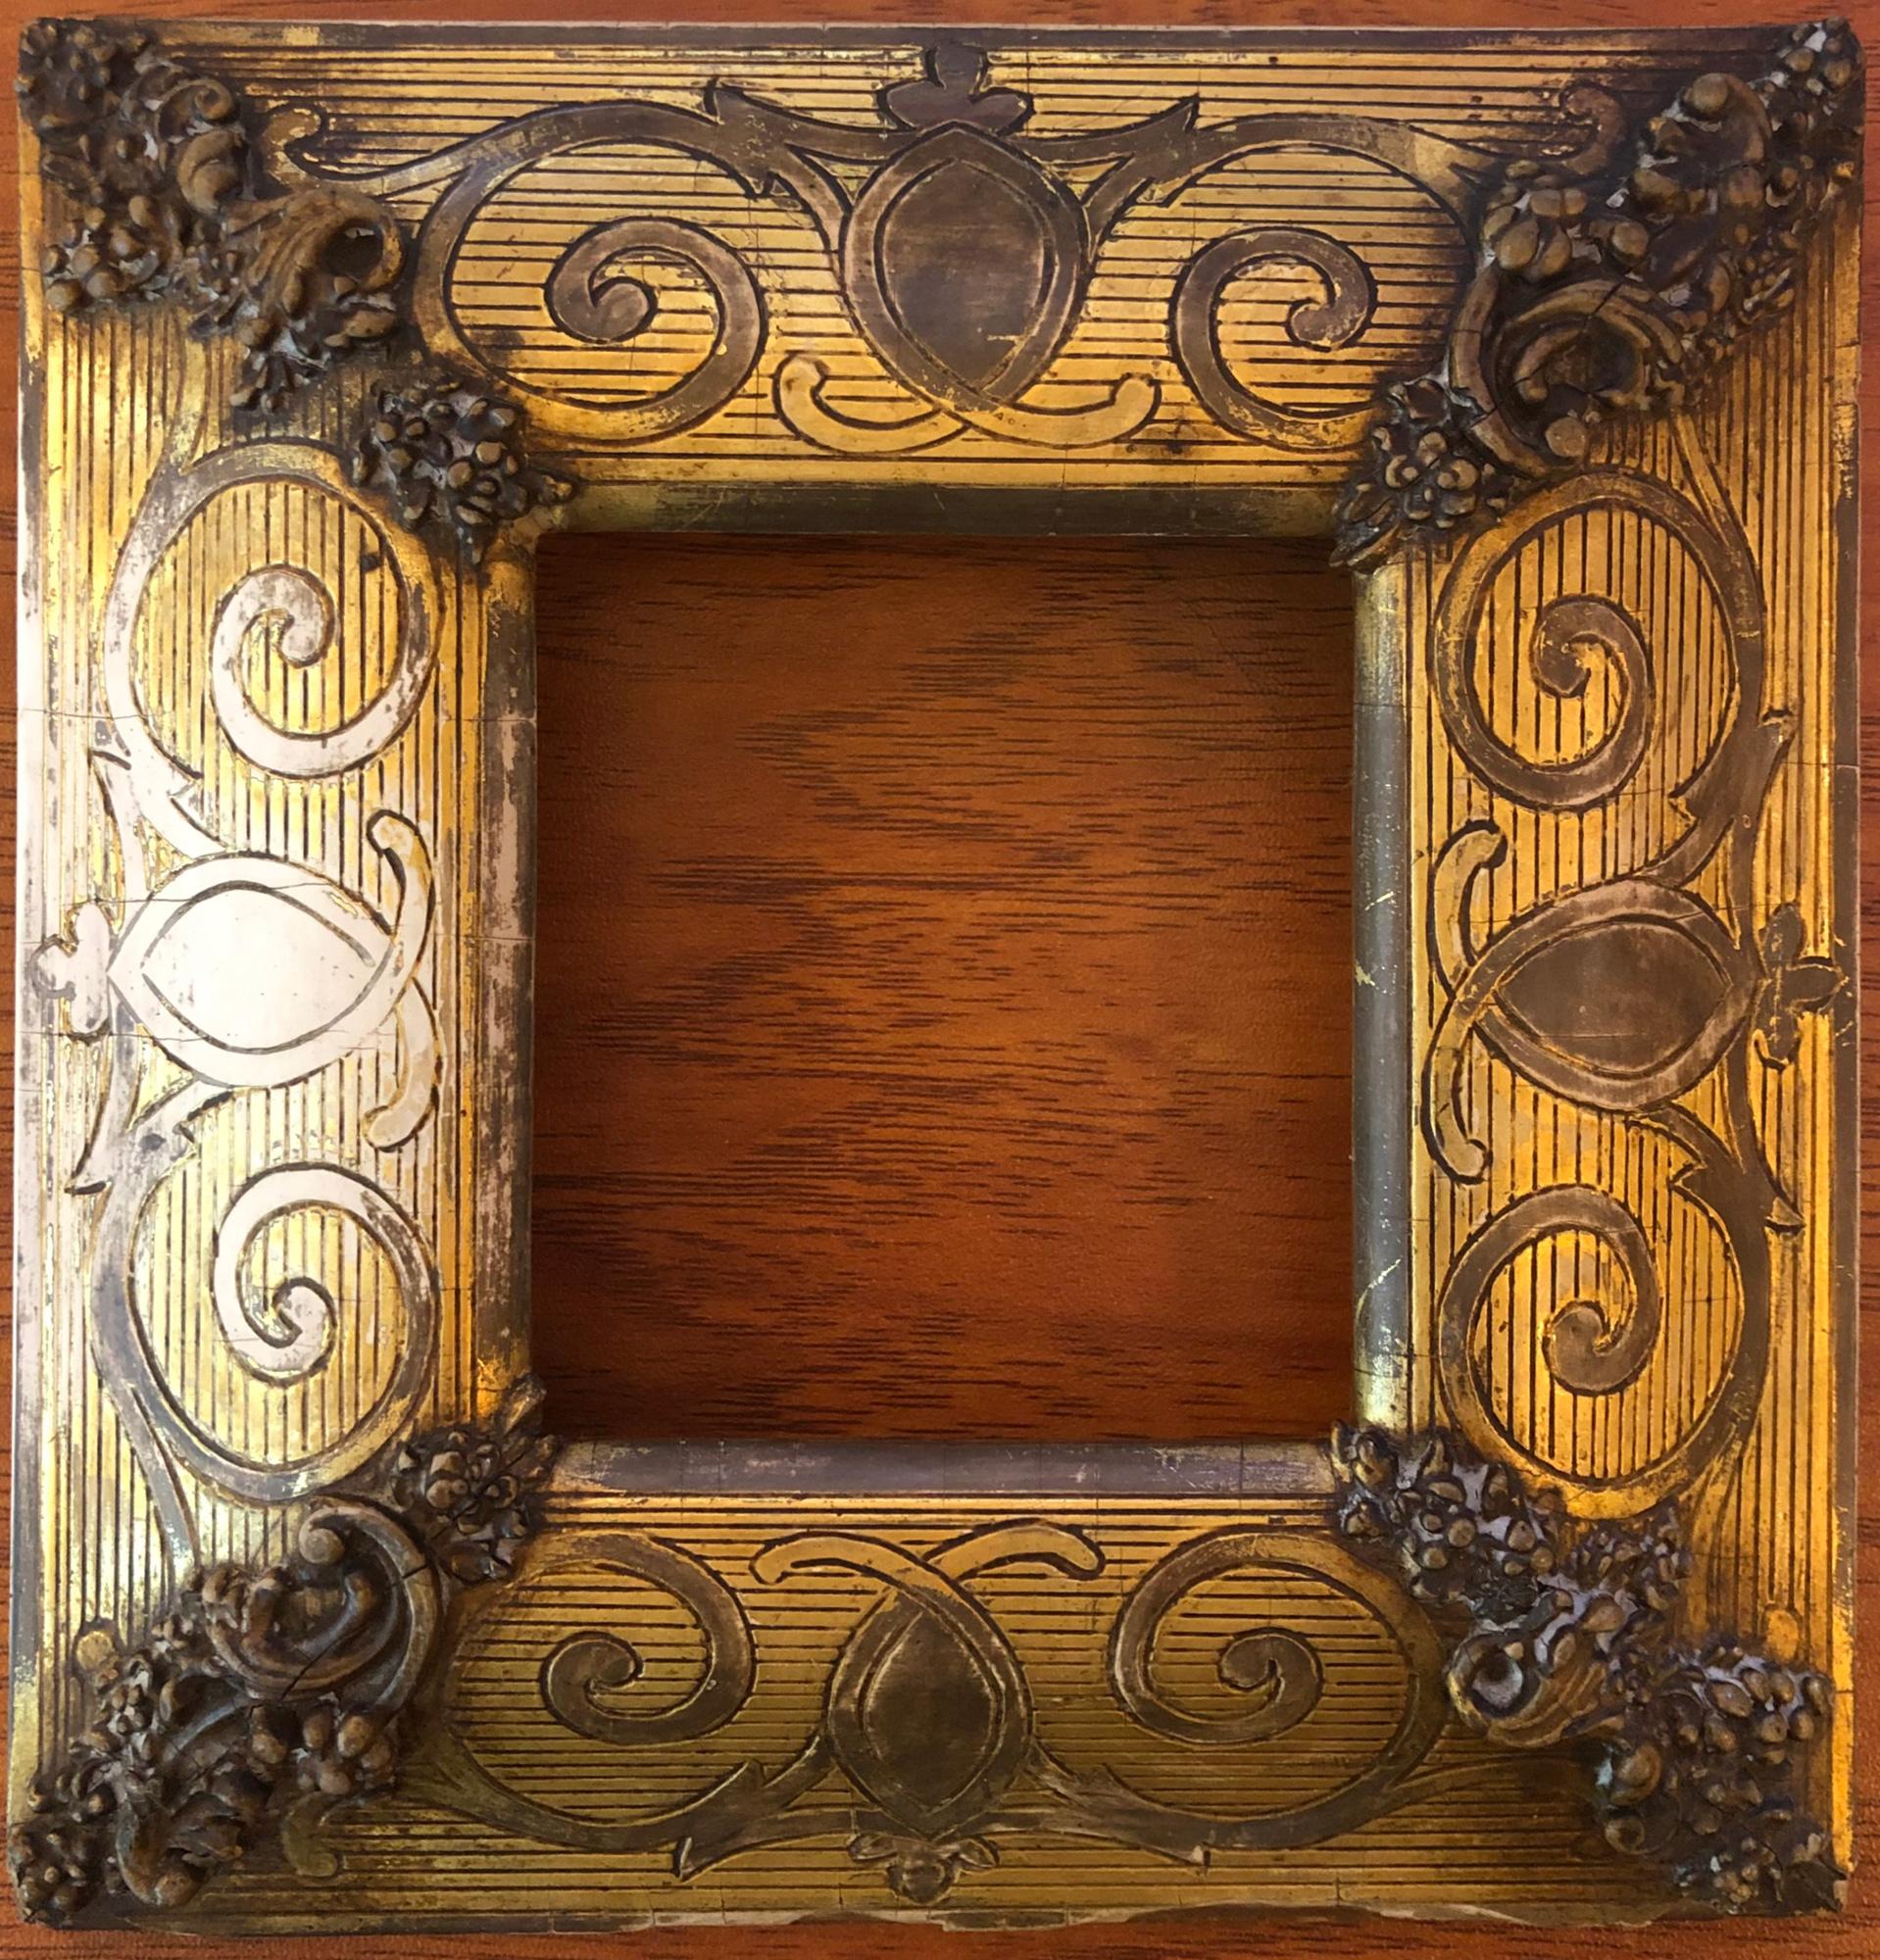 Oil on ivory panel, 2 3/8 x 2 inches (58 x 49 mm), painted to the margins.  Presented in the original period gilded gesso frame with handmade hardware.  Some surface soiling, minor rubbing in the areas of the margins which sit beneath the lip of the